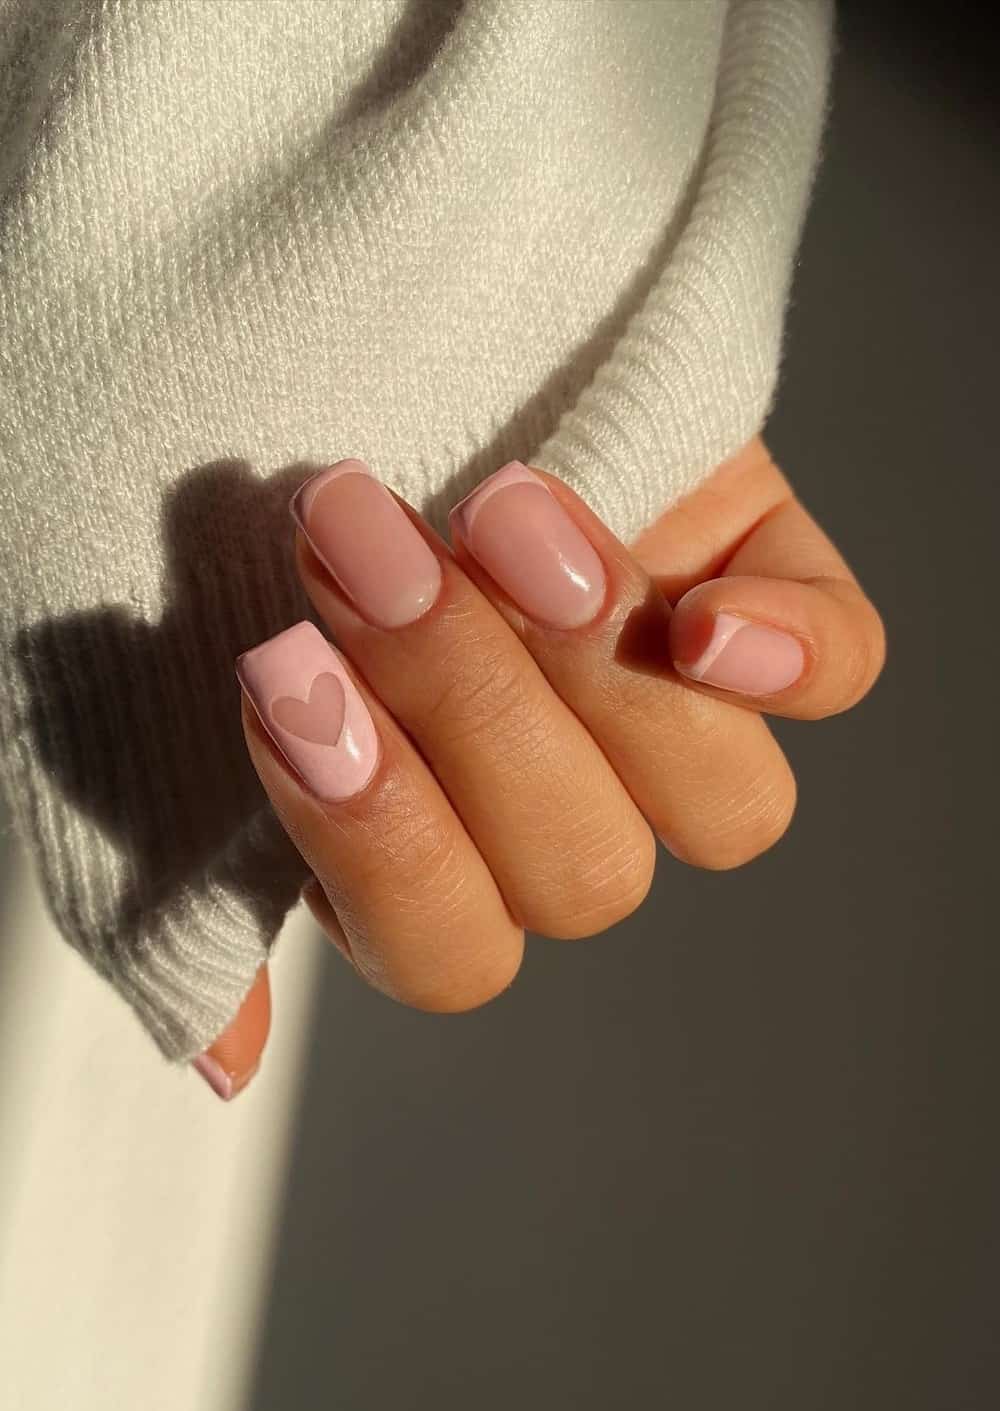 A hand with short square nails painted with light pink French tips and a light pink accent nail with a negative space heart